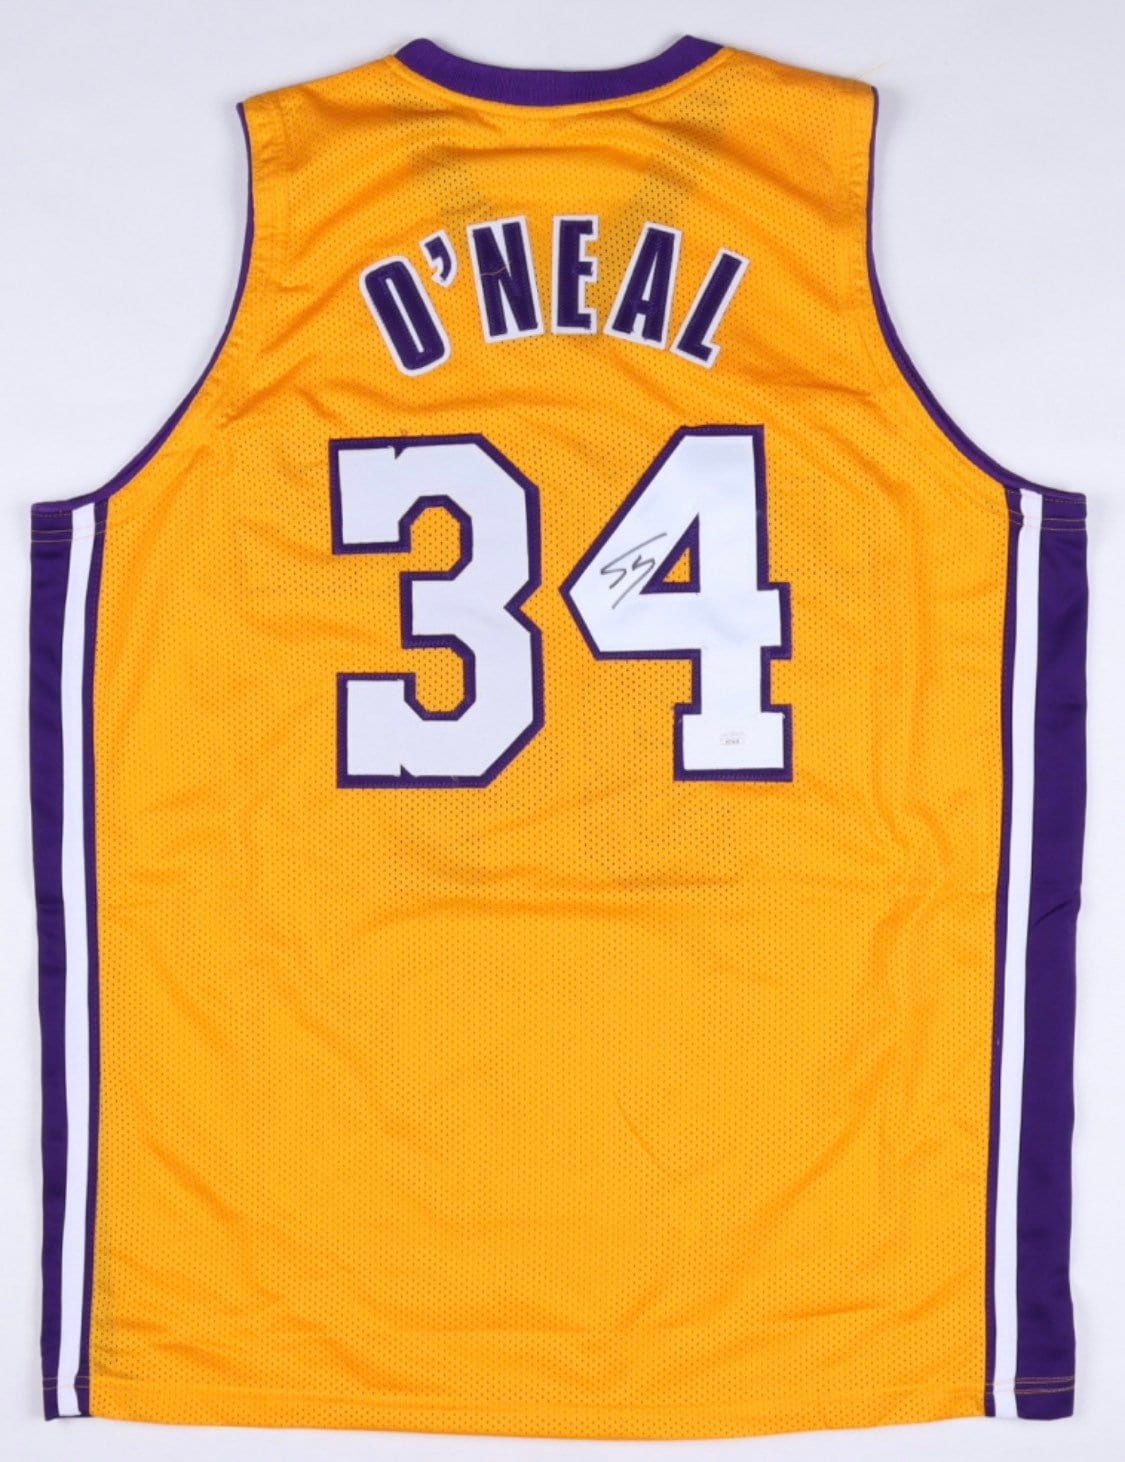 SHAQUILLE O'NEAL Authentic Jersey New 2003 2004 Reebok LA LAKERS #34  NBA 2XL